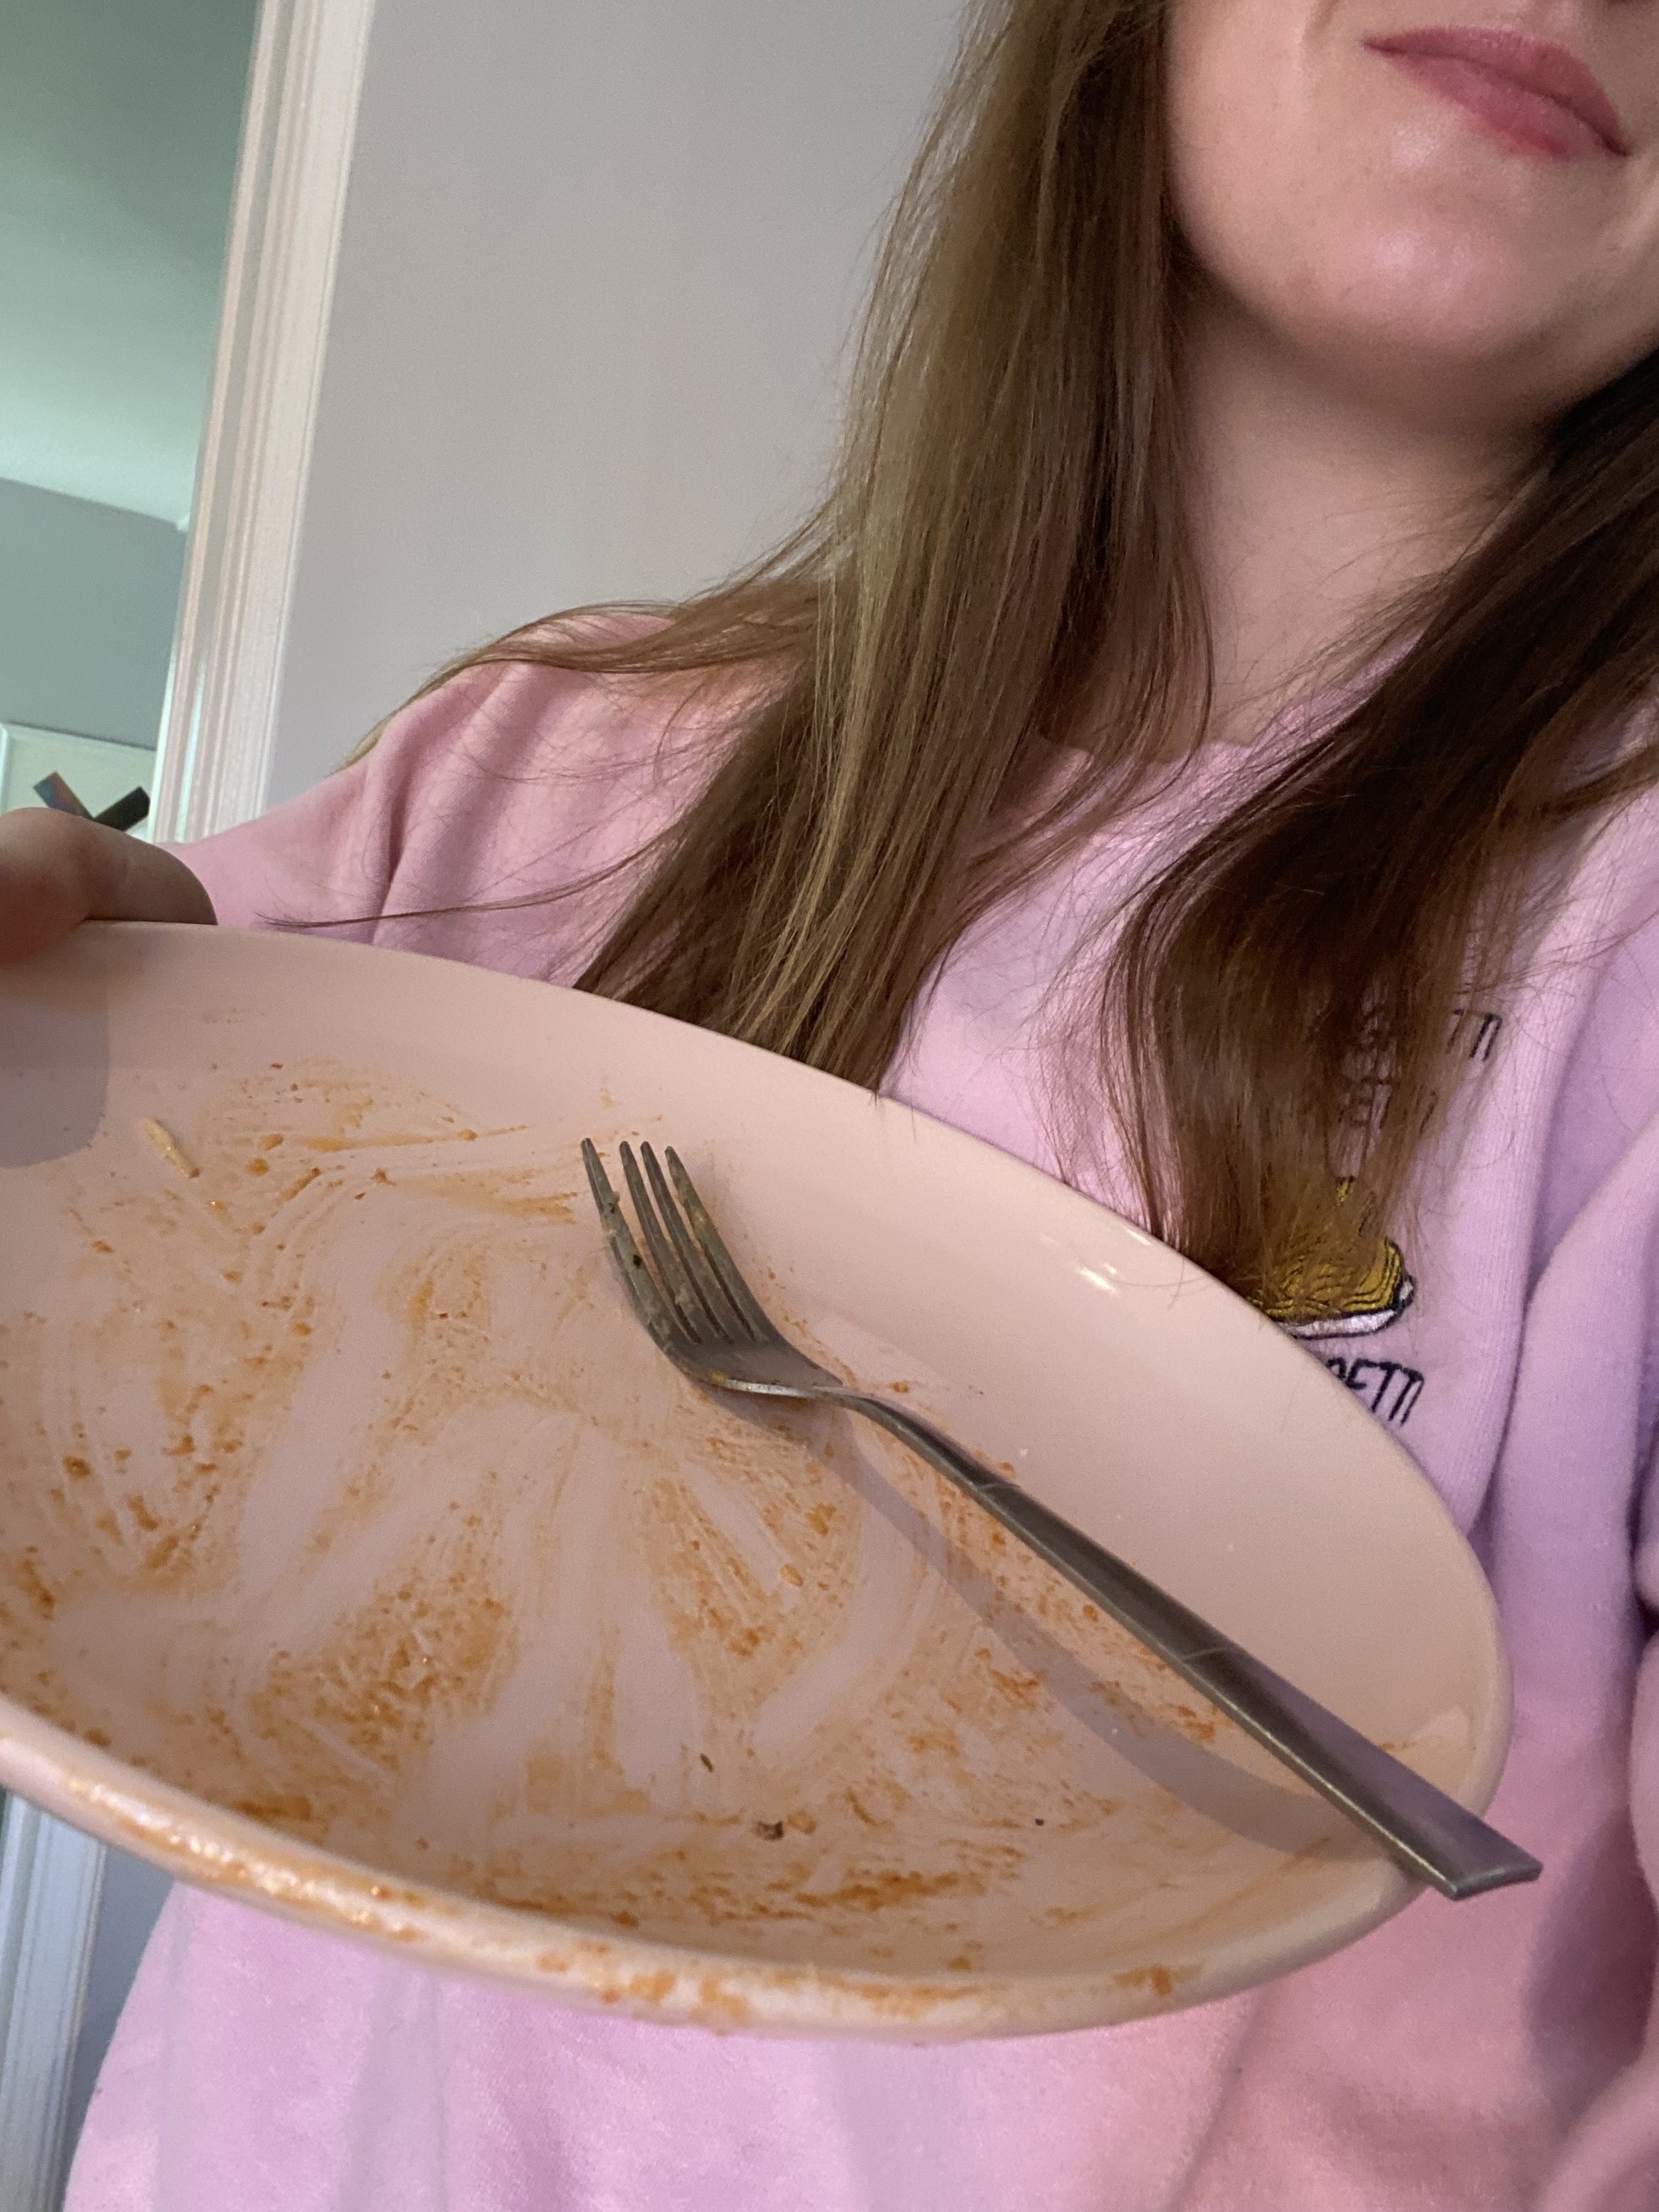 author with the empty plate